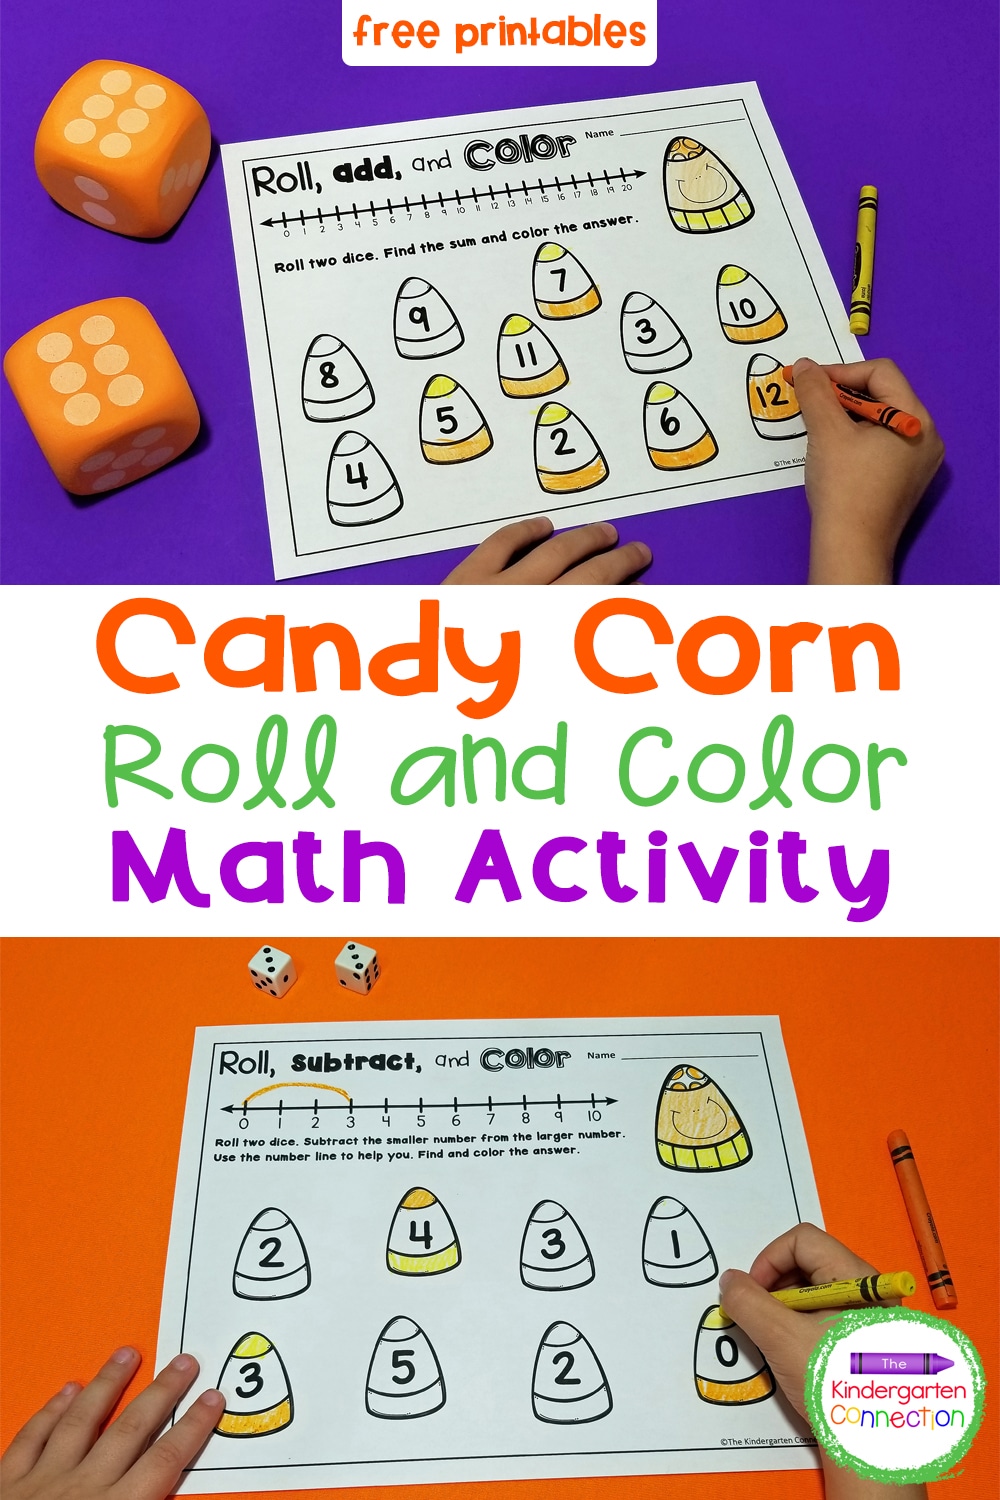 These free Candy Corn Roll and Color games are perfect for Pre-K, Kindergarten, and even 1st graders, as they come in 3 levels to play!